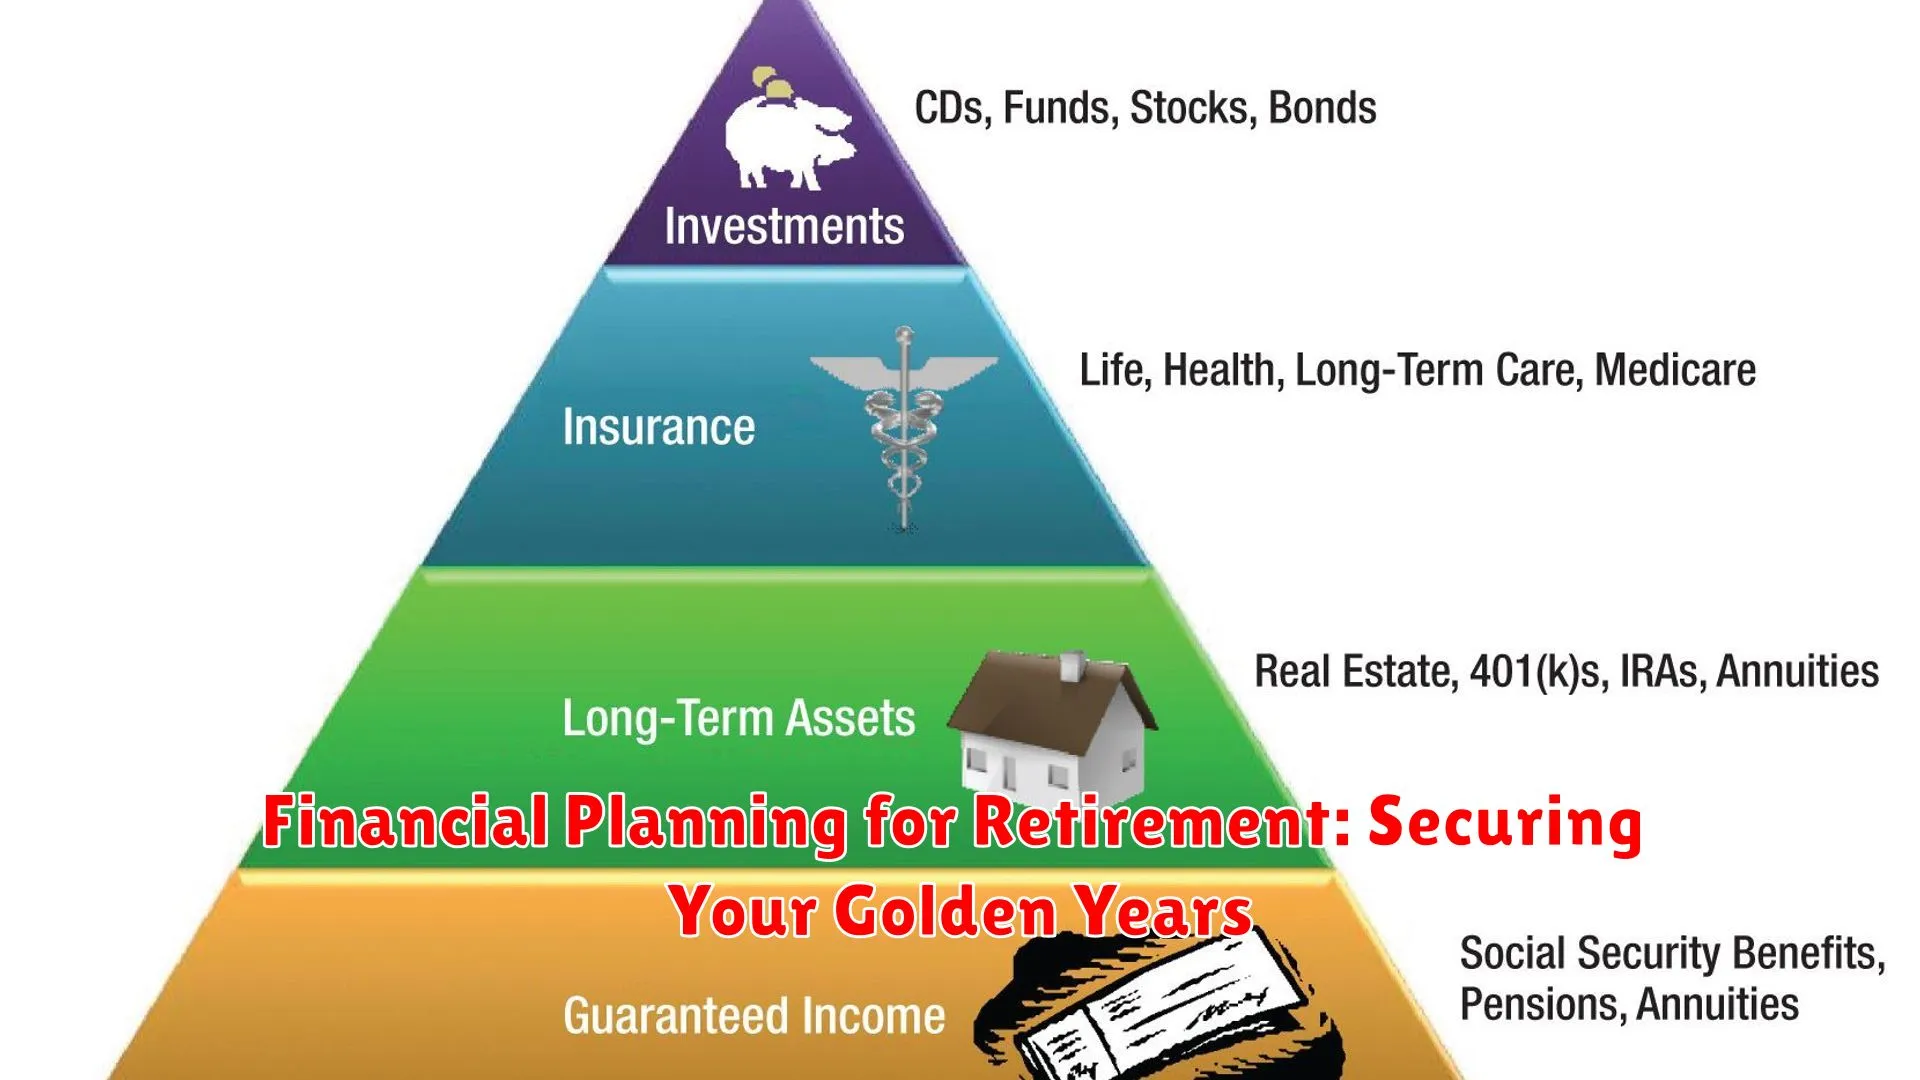 Financial Planning for Retirement: Securing Your Golden Years